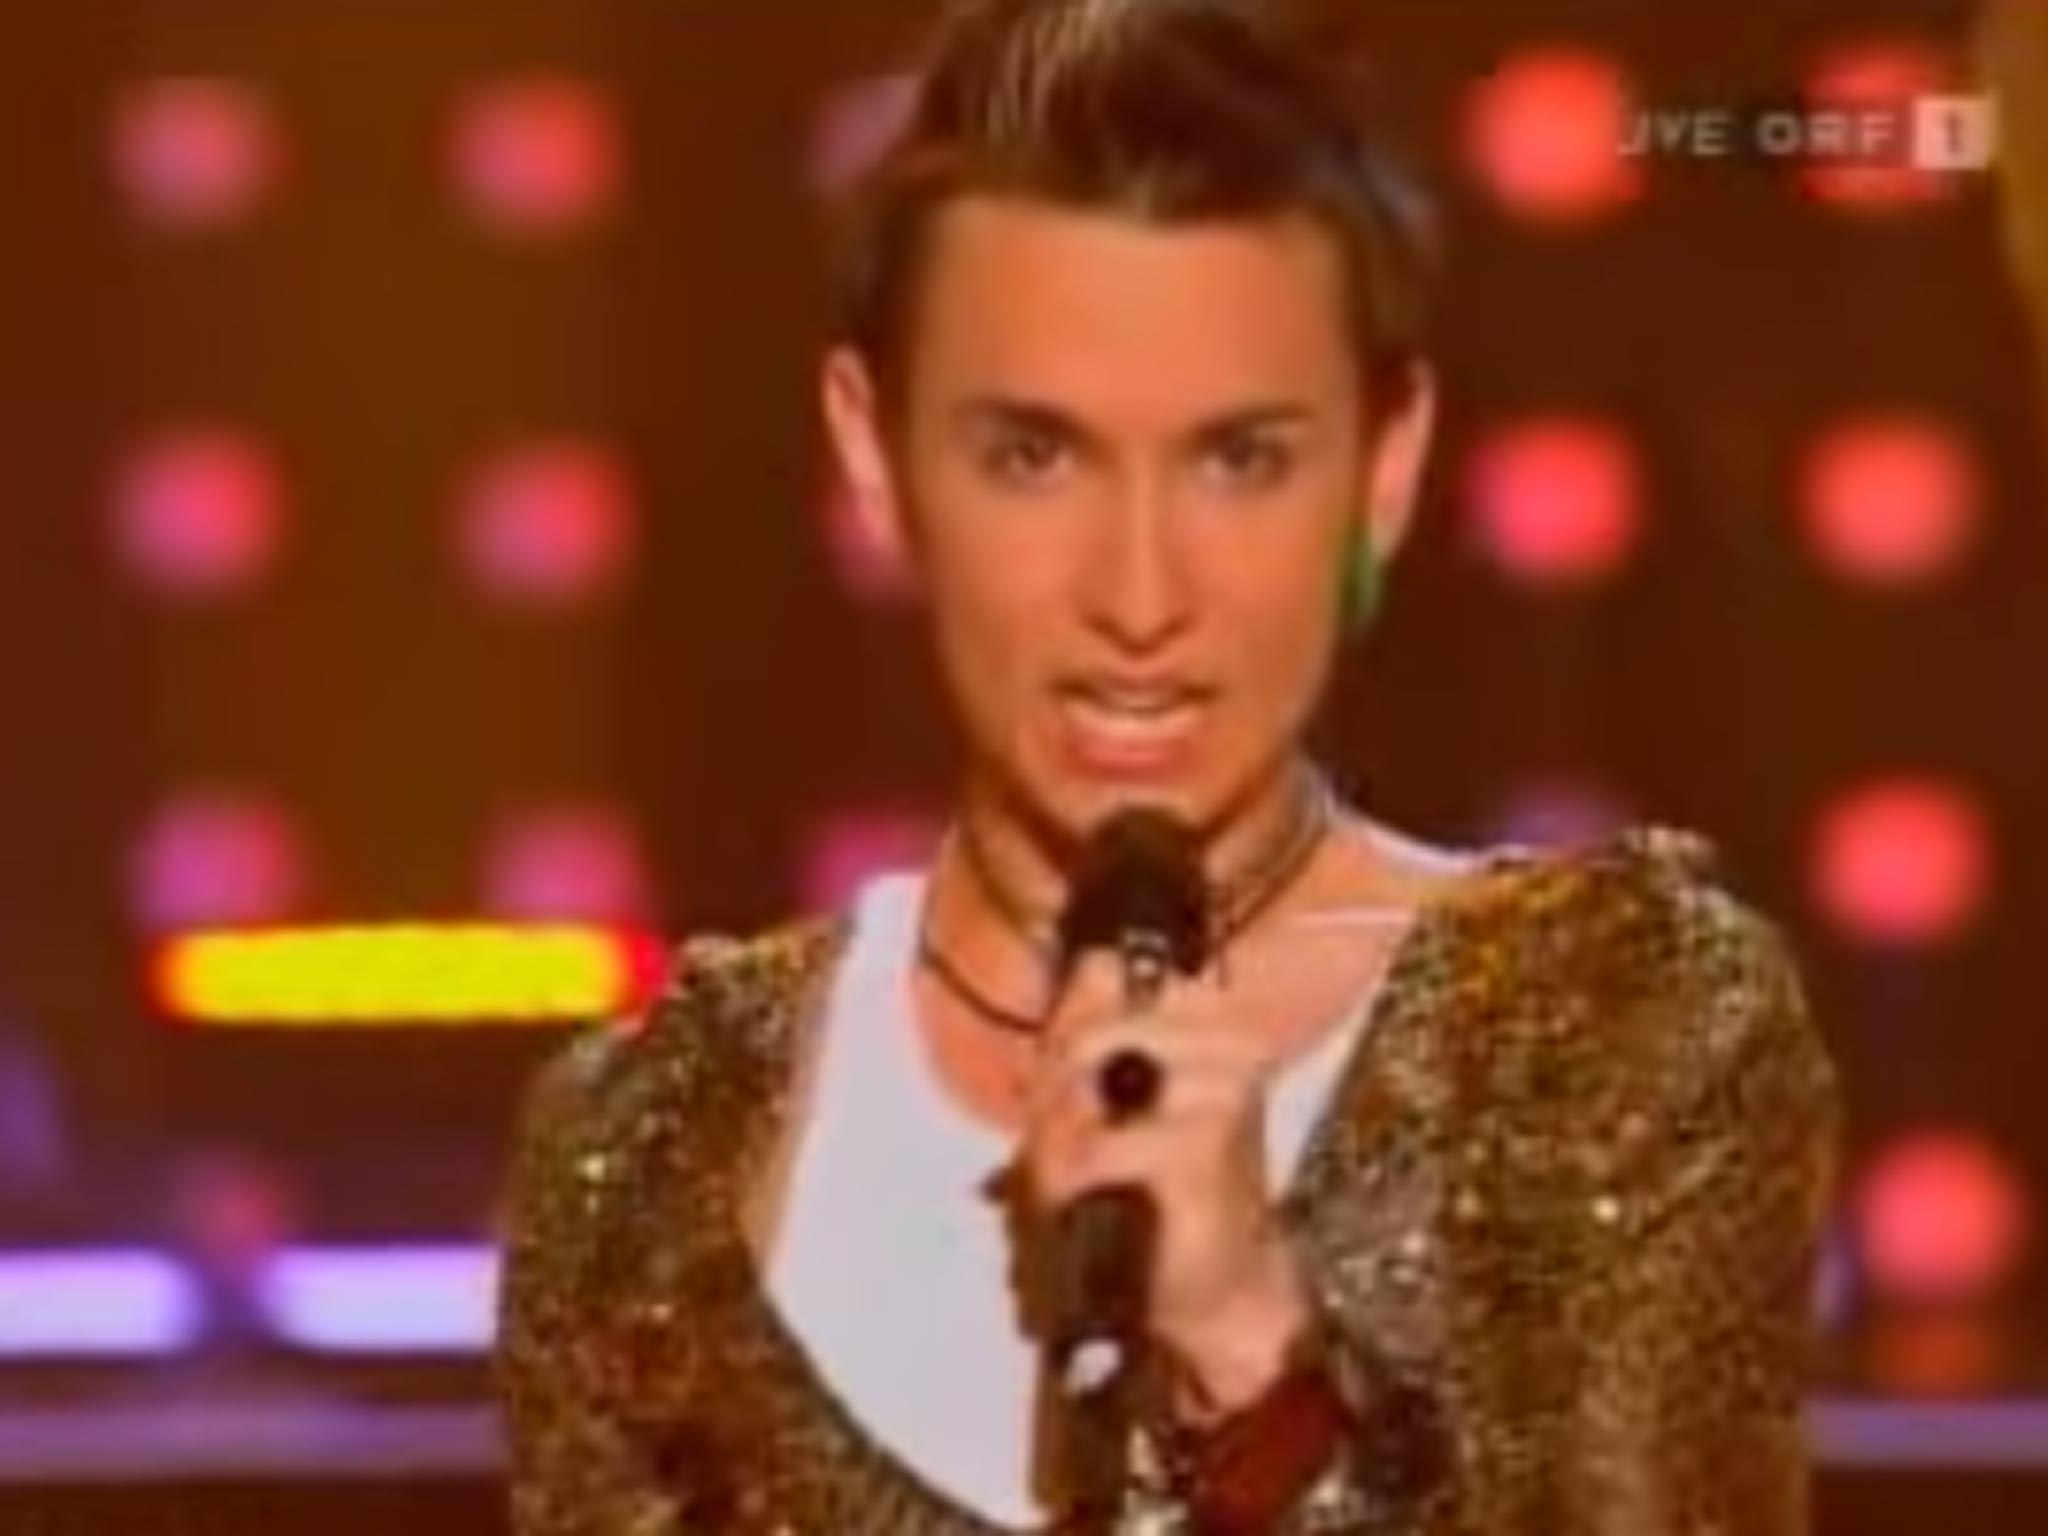 Before Conchita Wurst and Eurovision glory Tom Neuwirth was performing as himself on Austrian talent shows